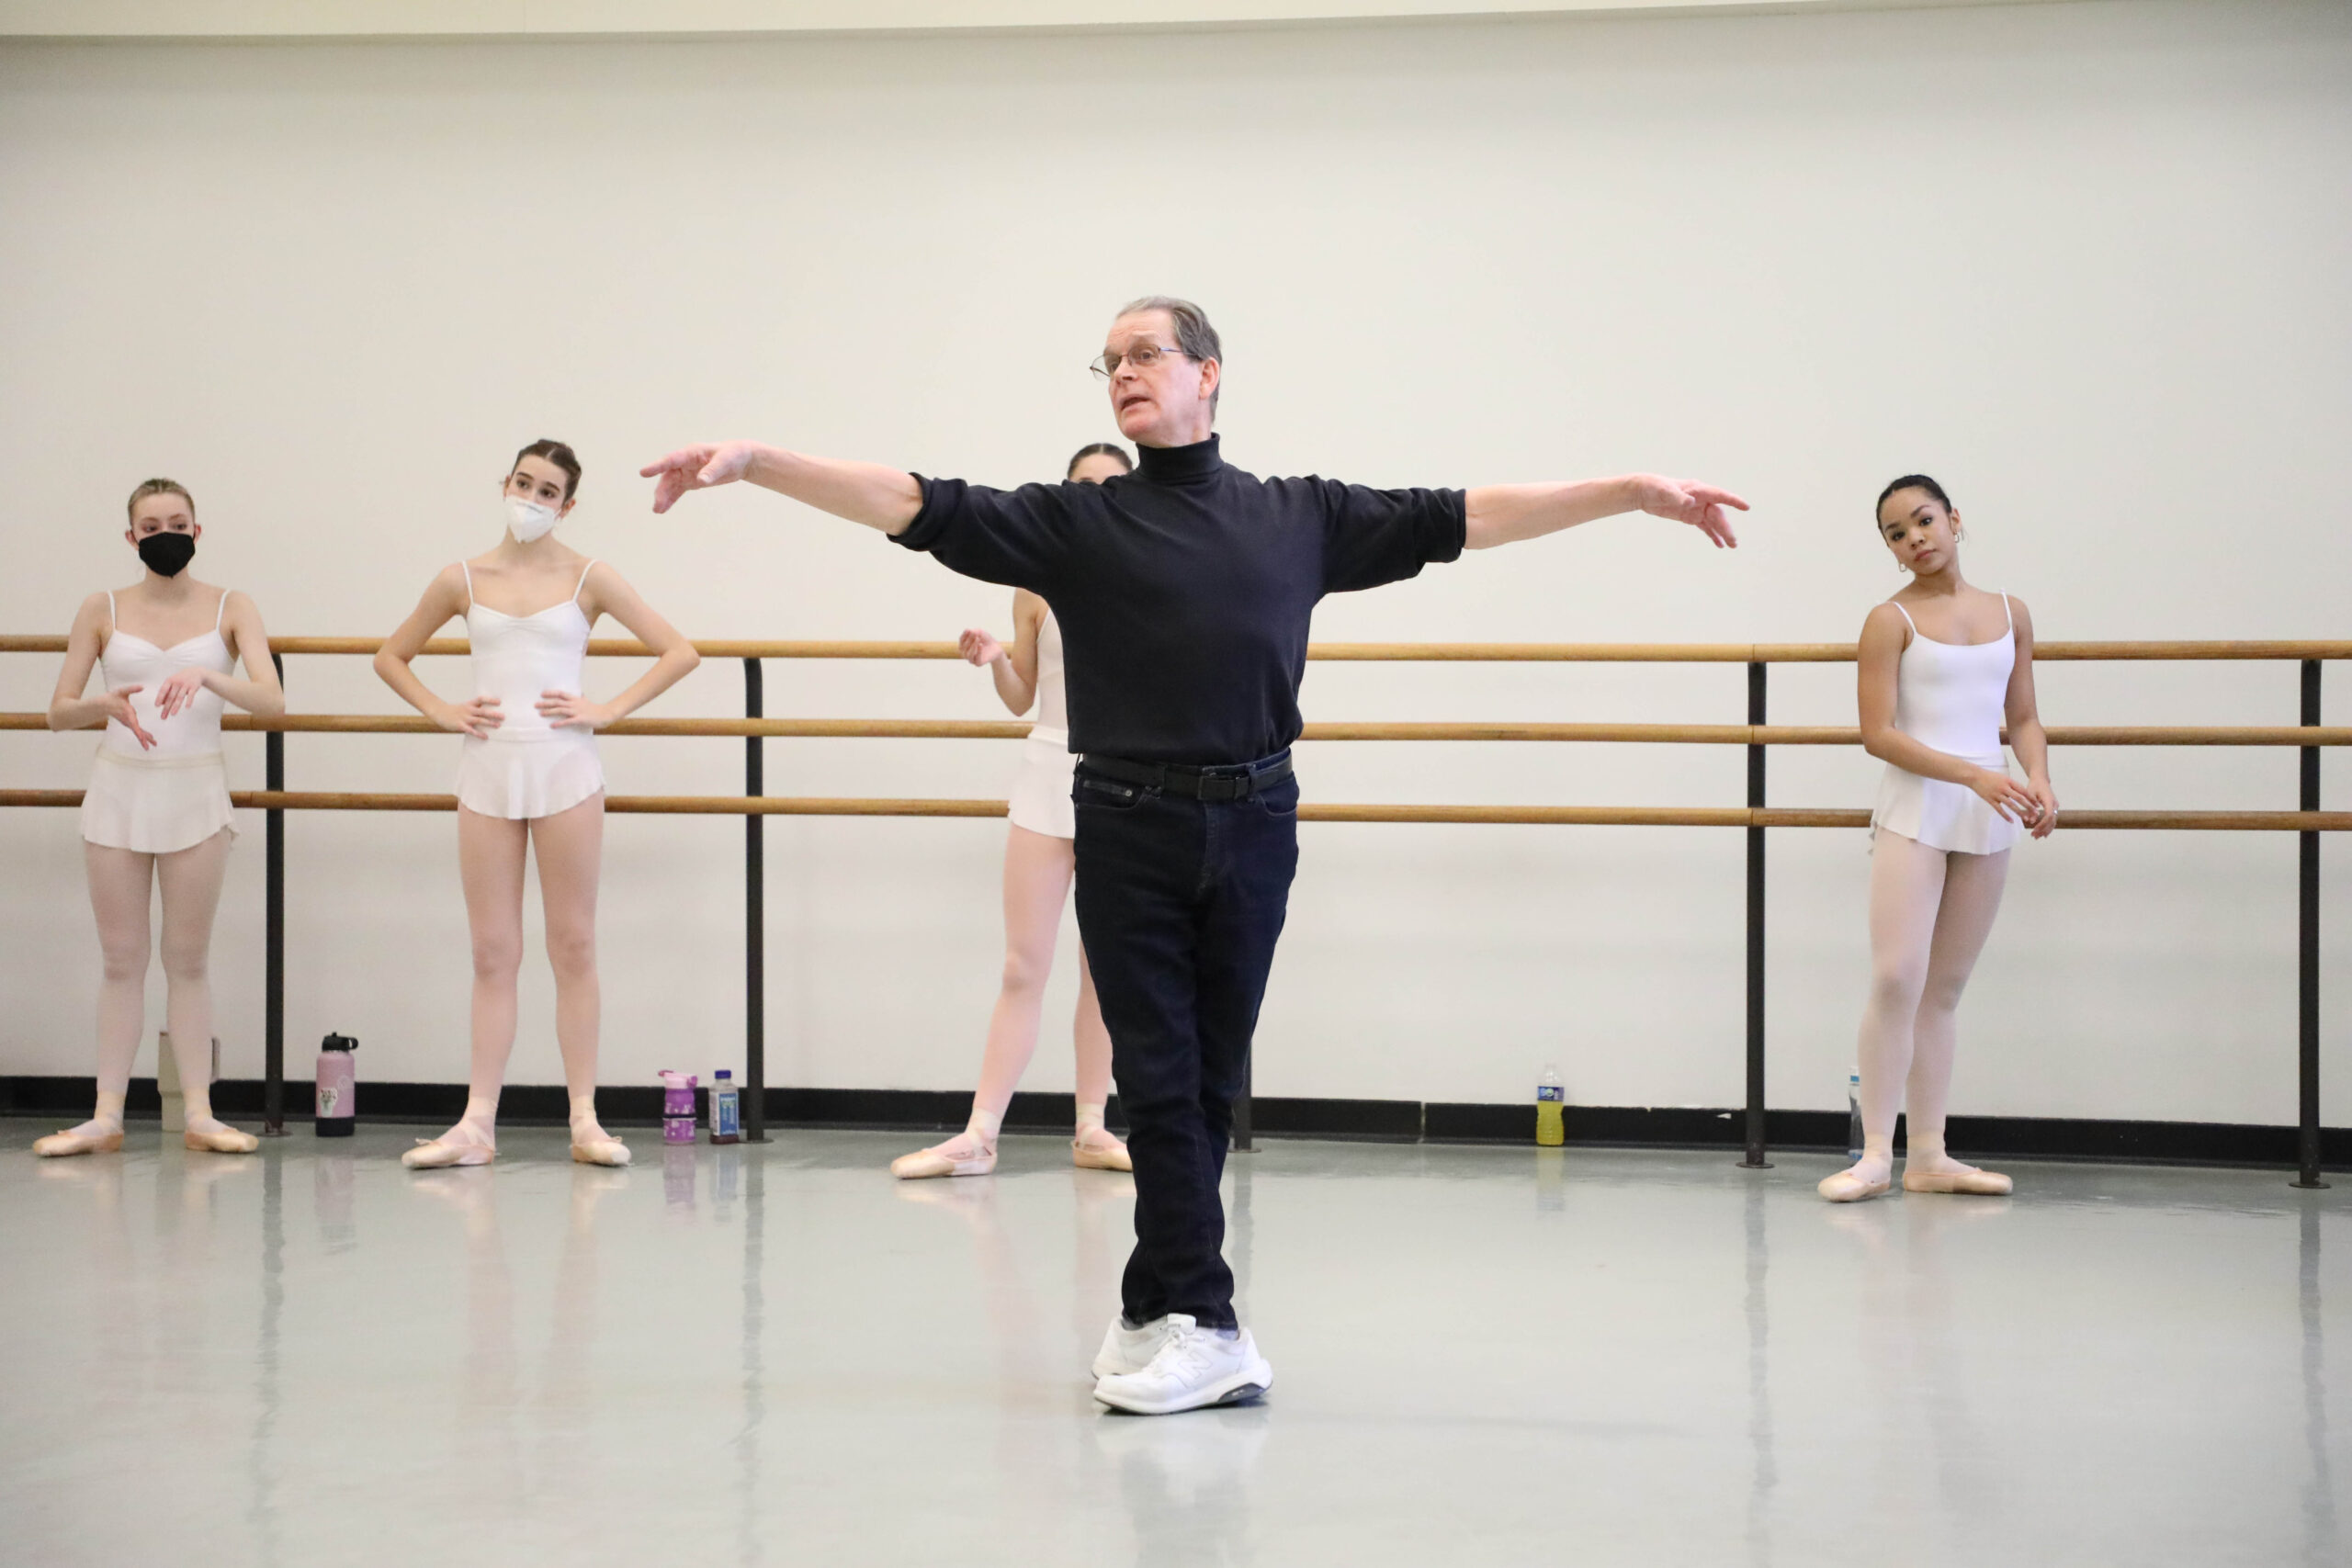 SAB Alumnus, former NYCB principal dancer and current Ballet Chicago Artistic Director, Daniel Duell